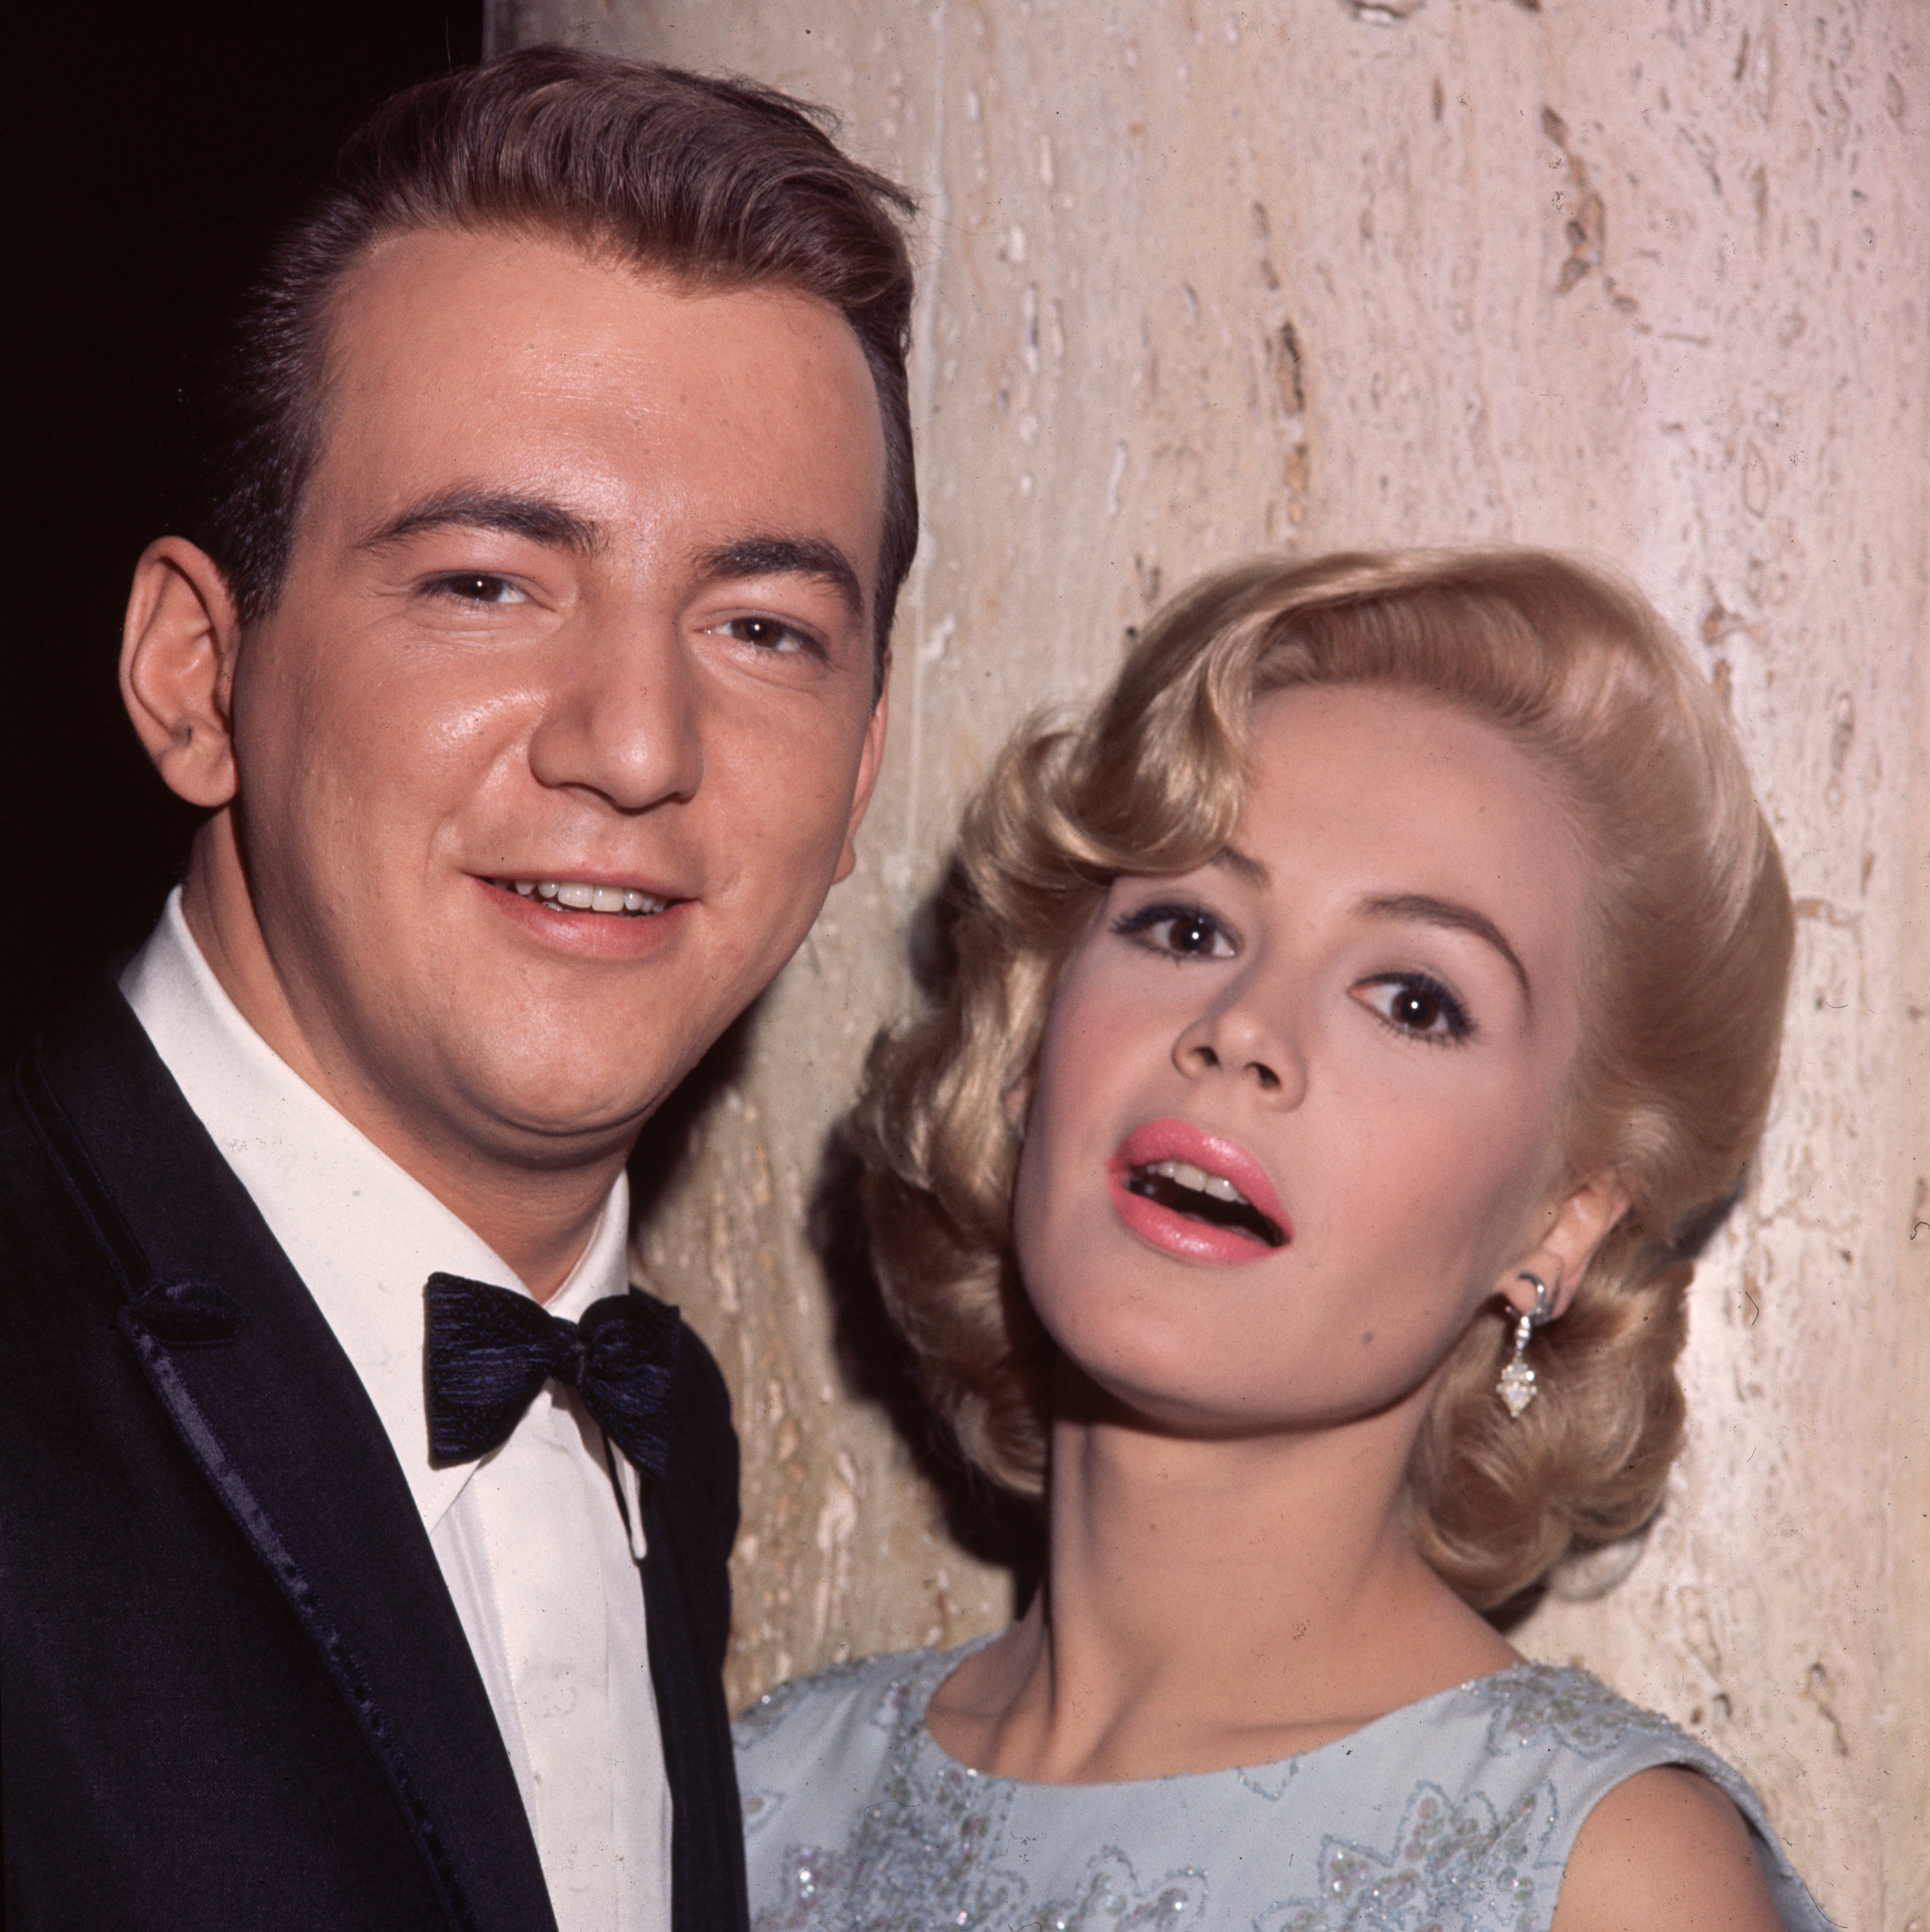 Bobby Darin and Sandra Dee posing for a headshot in 1962 | Source: Getty Images